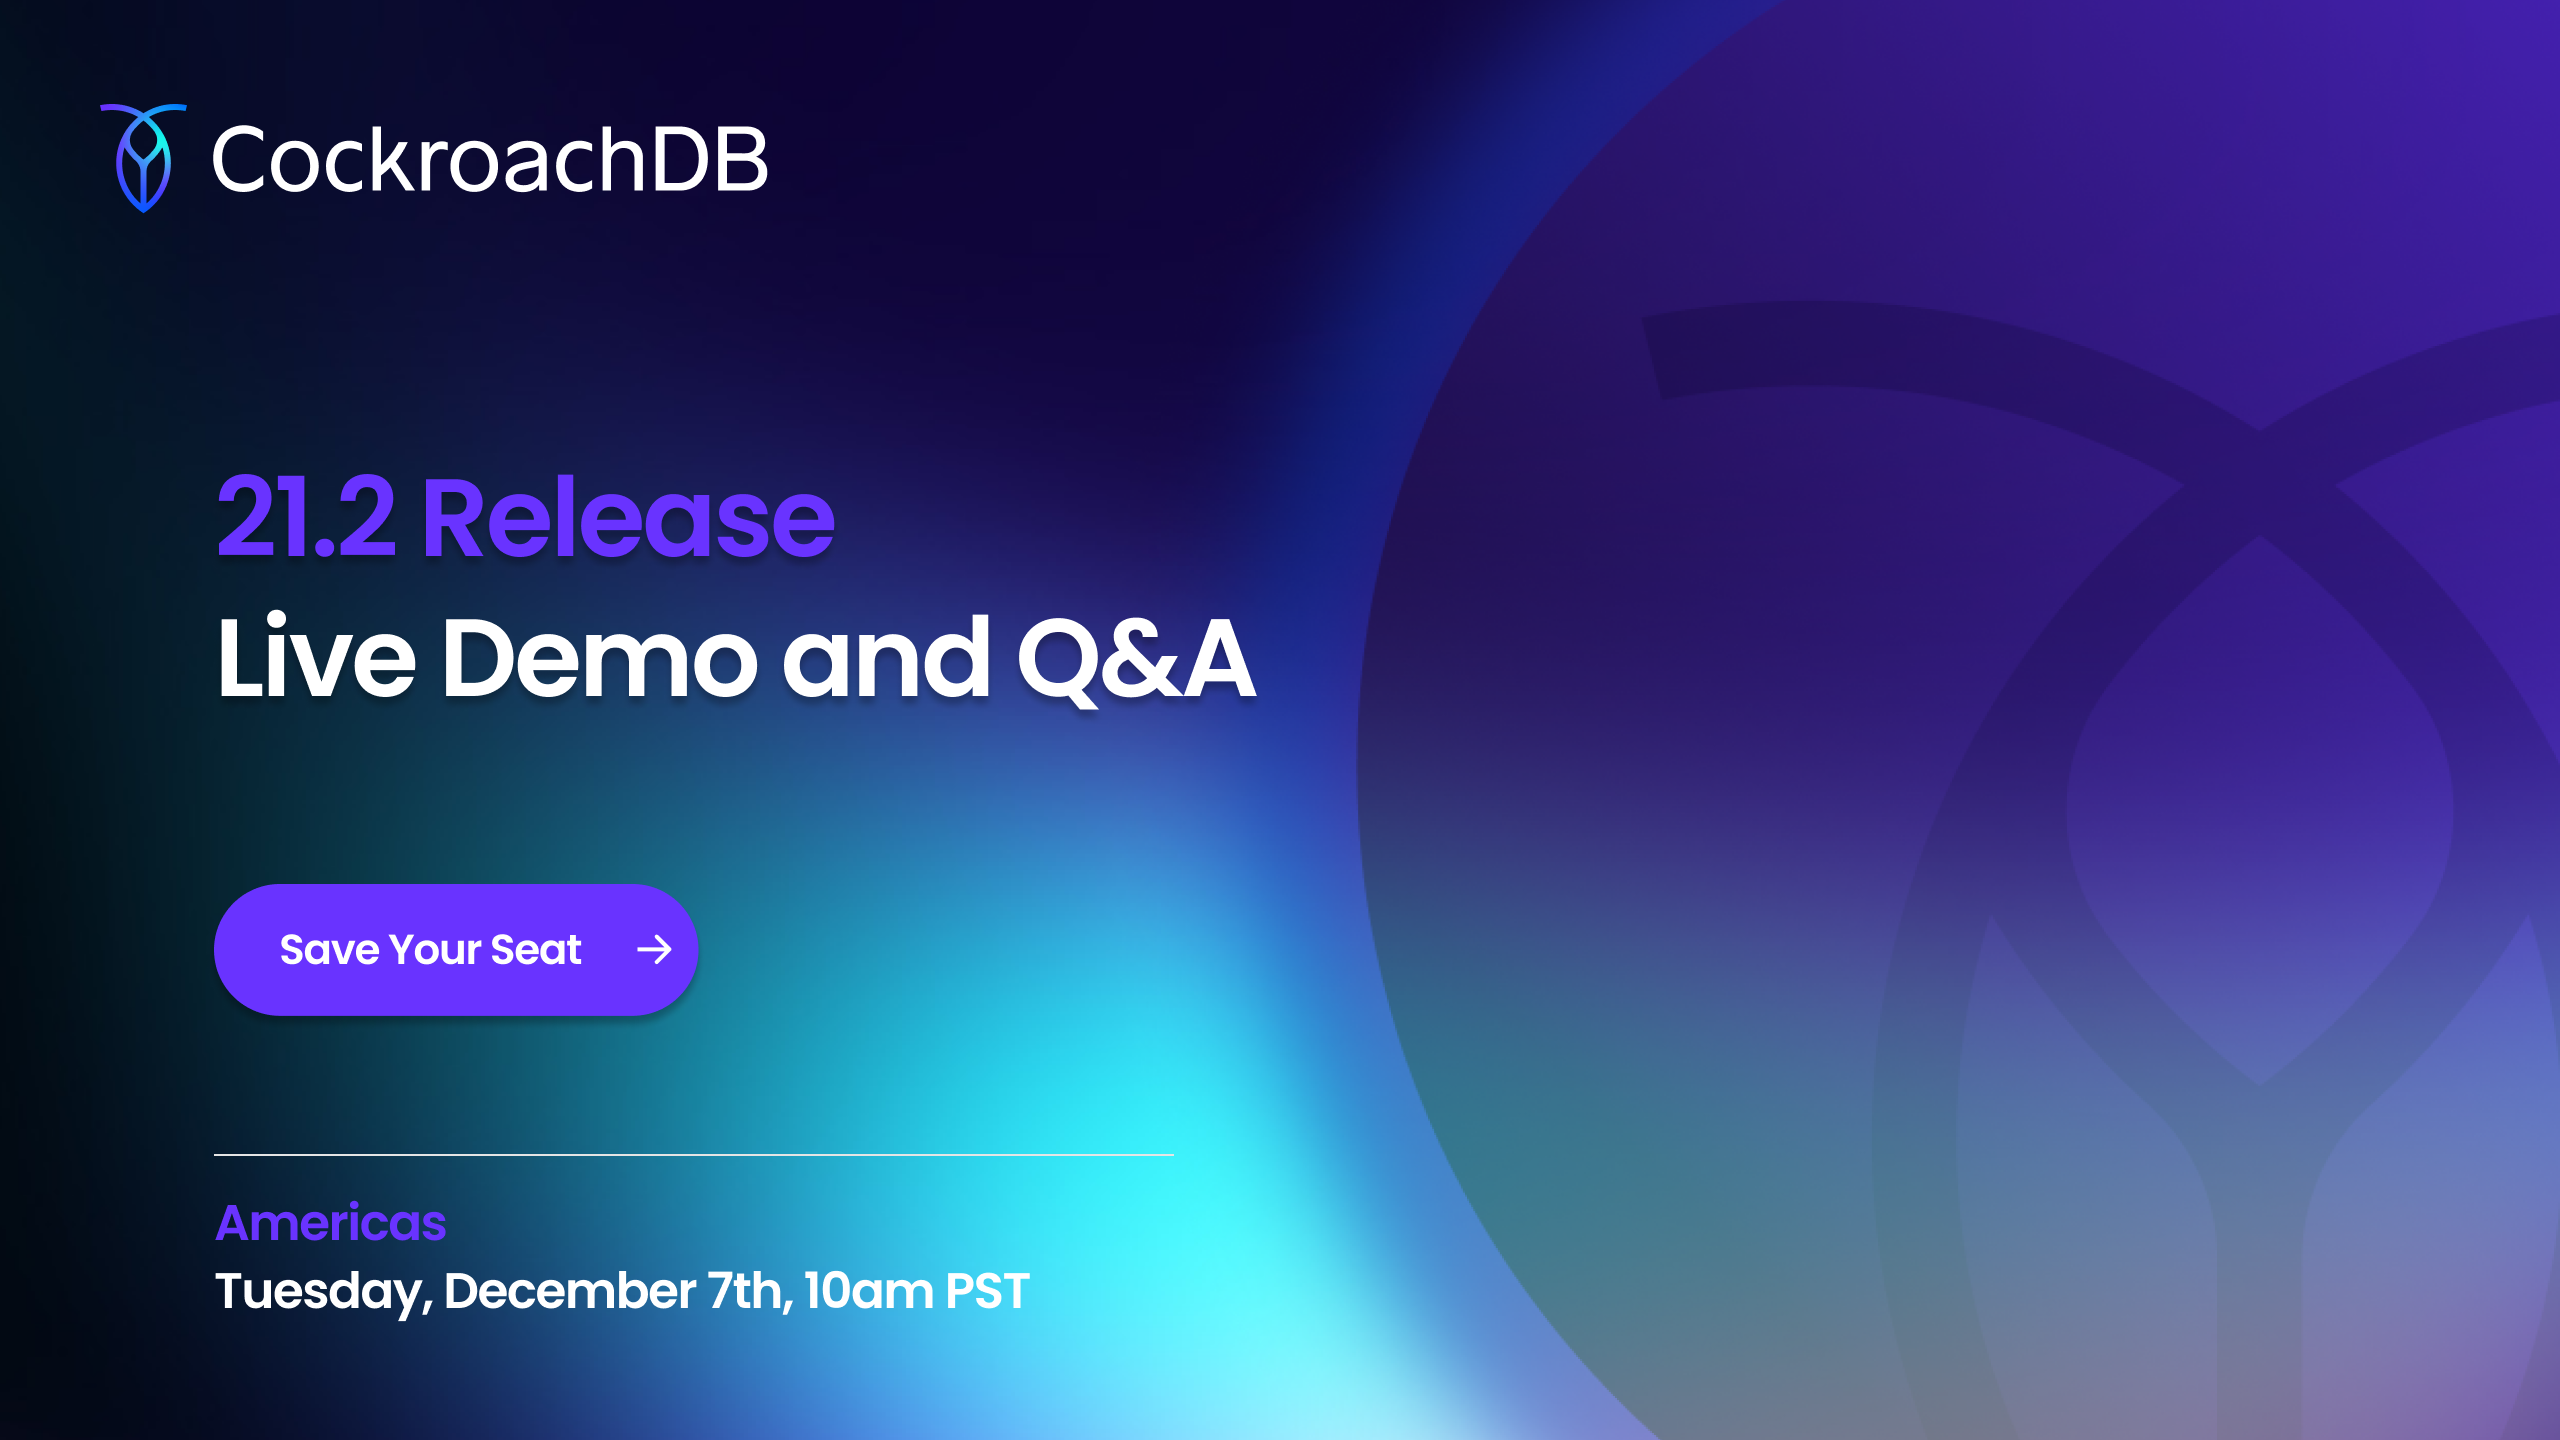 CockroachDB 21.2 Release: Live Demo and Q&A